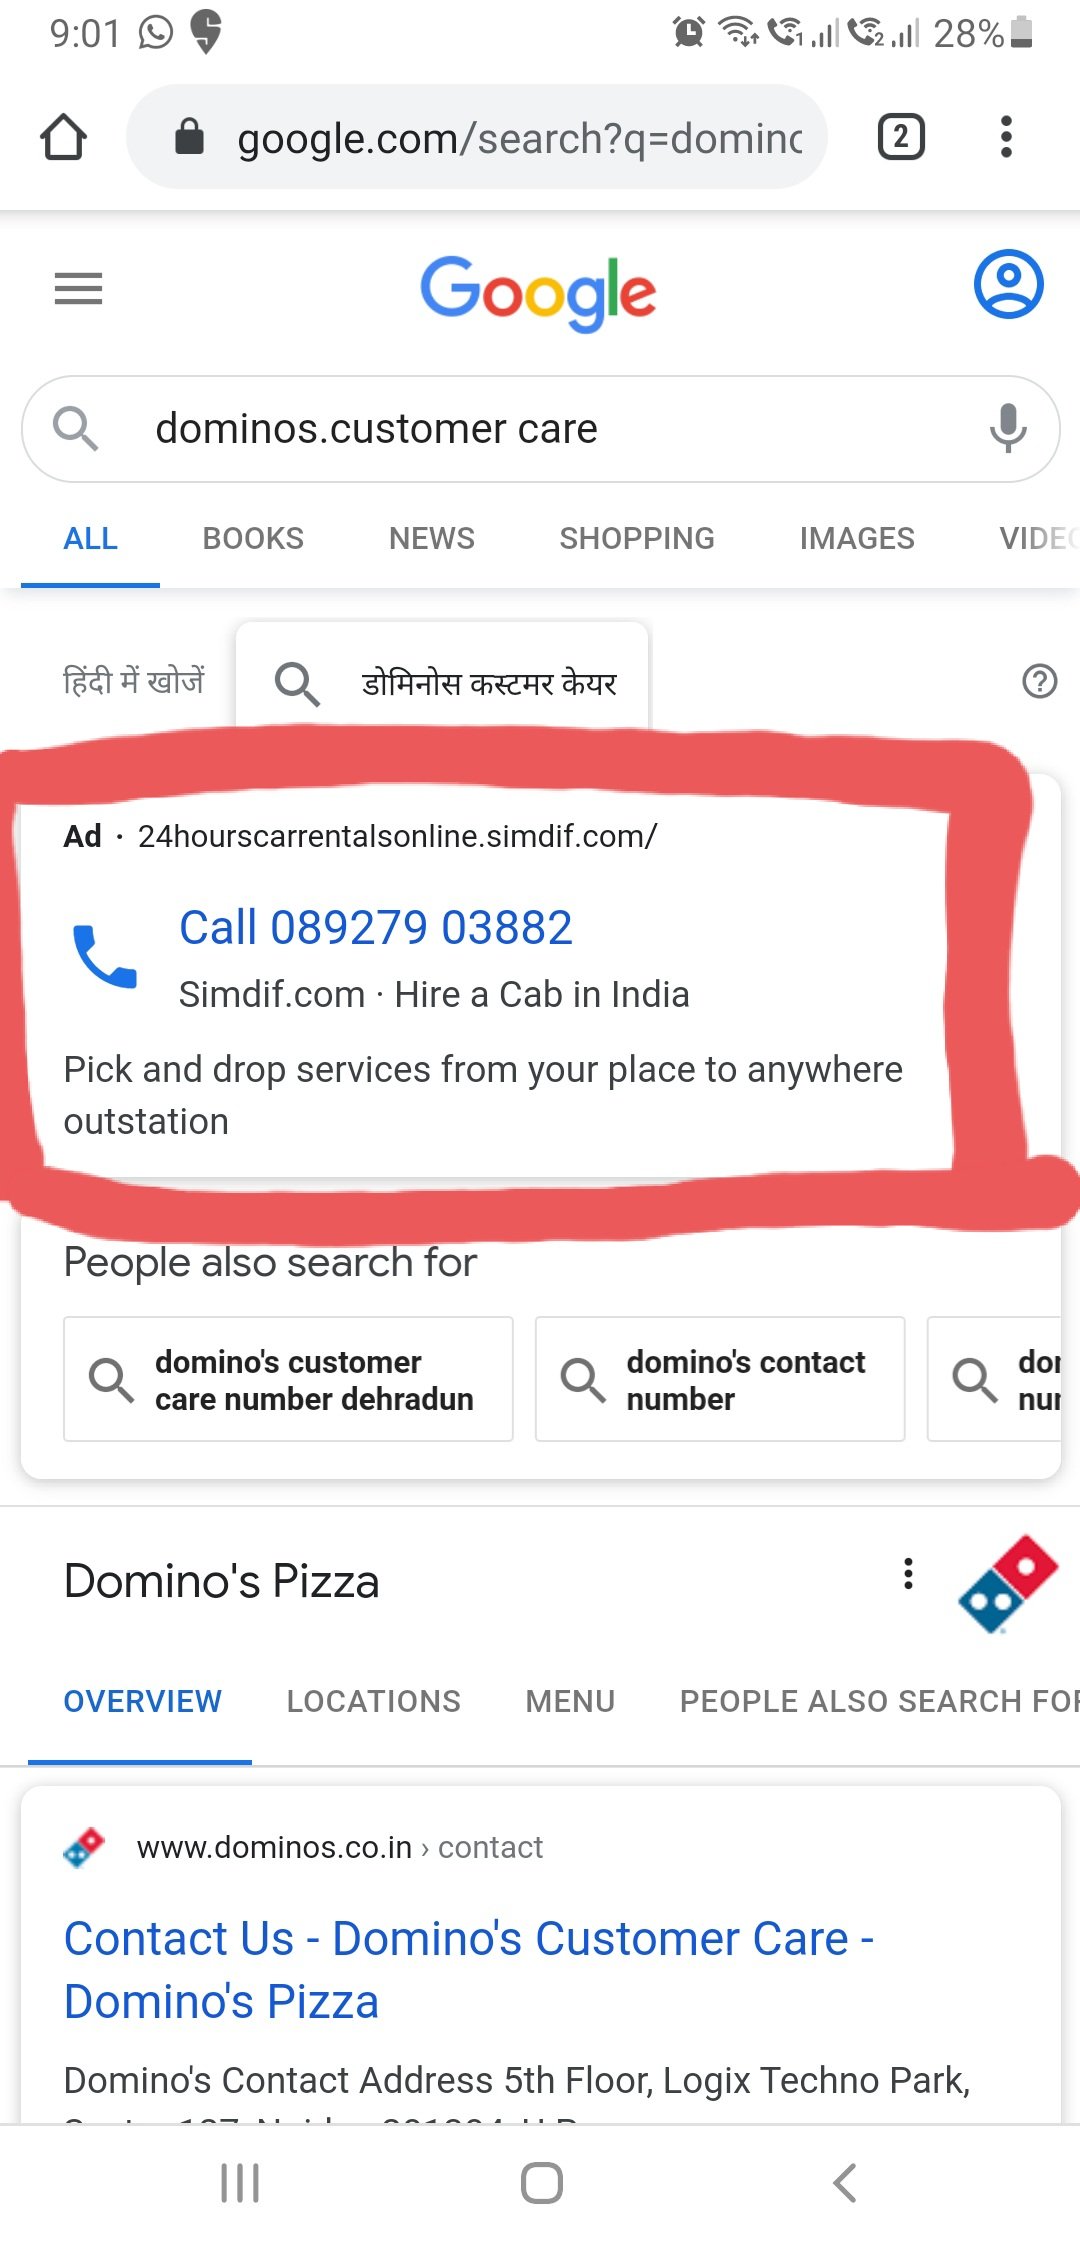 doe alstublieft niet punt Afgekeurd Rashmi Kulasari on Twitter: "@dominos_india @cyber @GoogleIndia @anydesk @ dominos @Google Ordered: Dominos via Swiggy :19th oct :8:28 pm Main basis  of writing this incident is that "Anyone can be scammed". @anydesk please